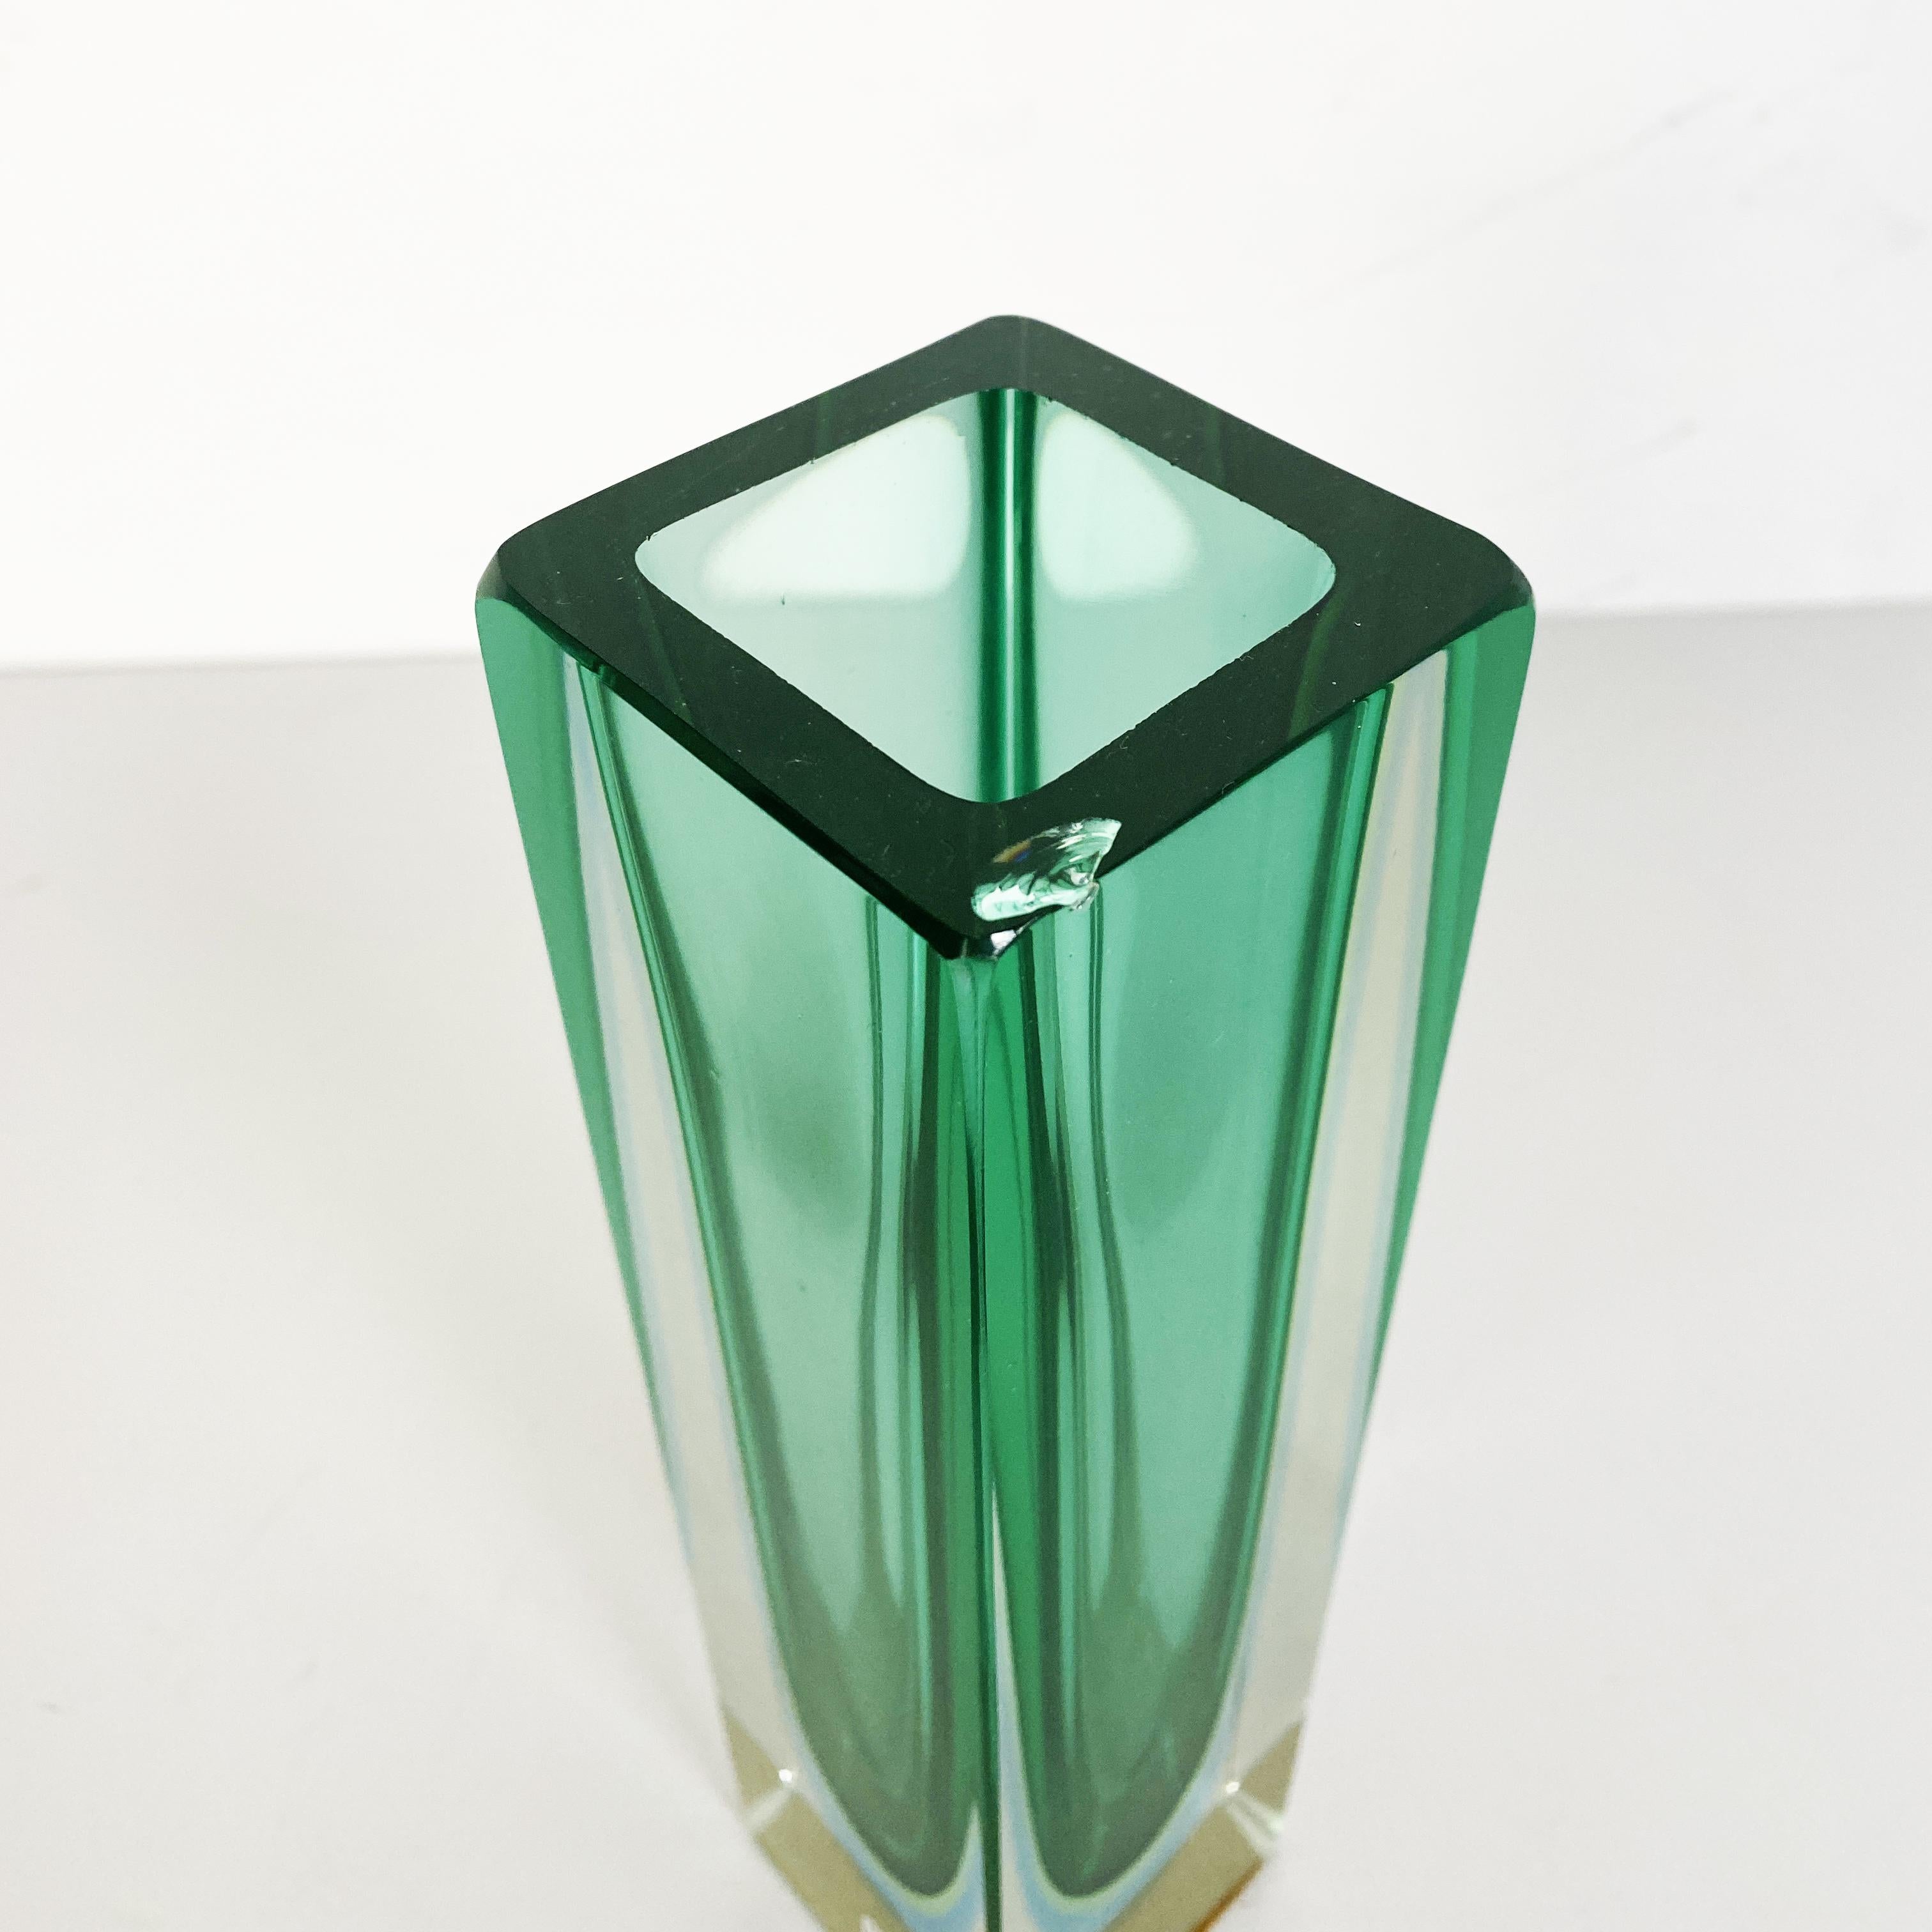 Italian Mid-Century Green Murano Glass Vase with Internal Blue Shades, 1970s For Sale 1